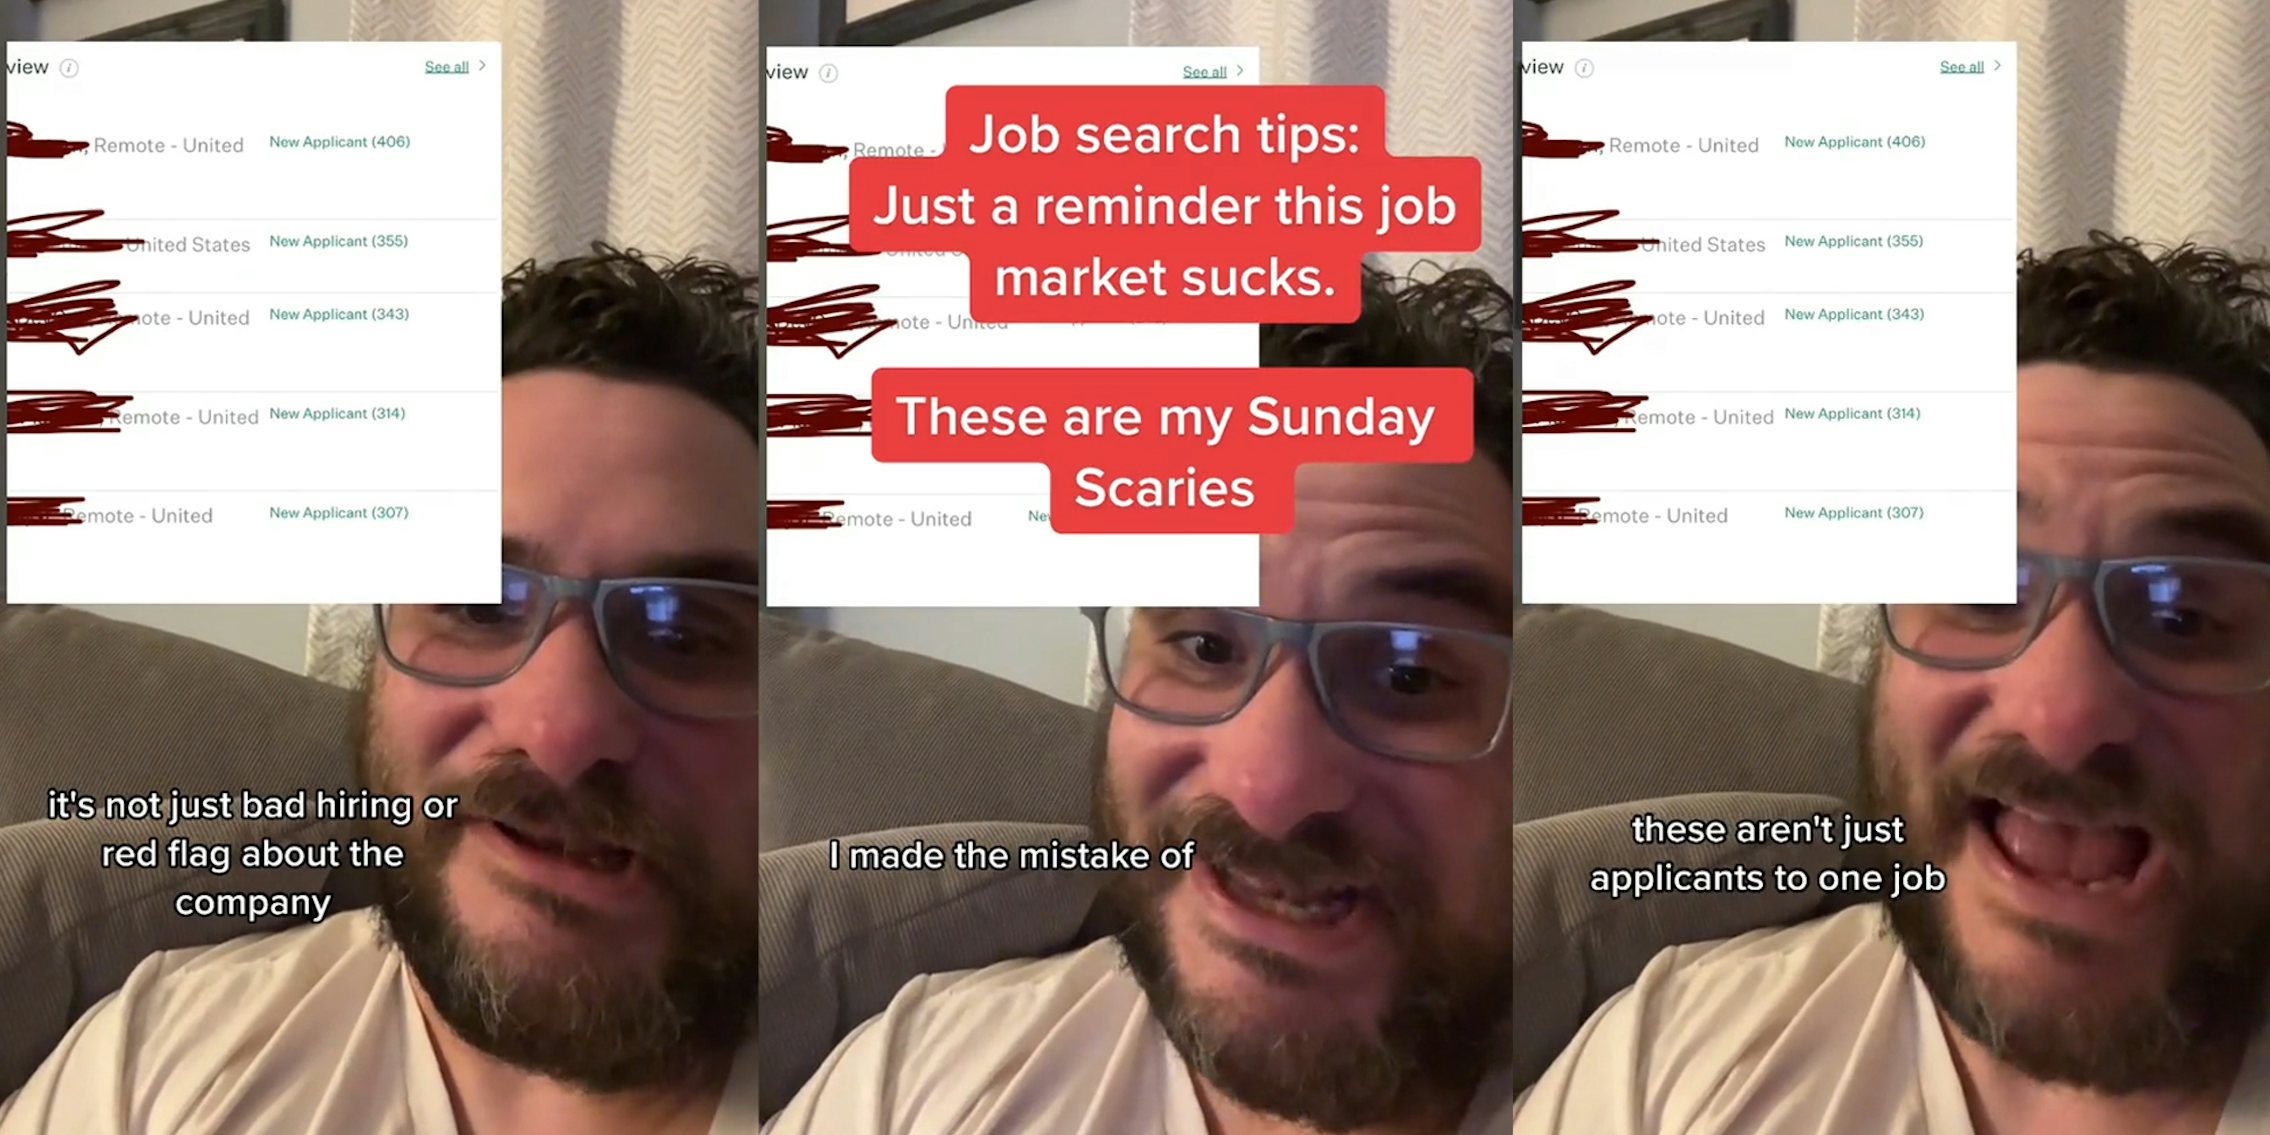 job hunter speaking with applicants image and caption 'it's not just bad hiring or red flag about the company' (l) job hunter speaking with applicants image and caption 'Job search tips: Just a reminder this job market sucks. These are my Sunday Scaries' 'I made the mistake of' (c) job hunter speaking with applicants image and caption 'these aren't just applicants to one job' (r)